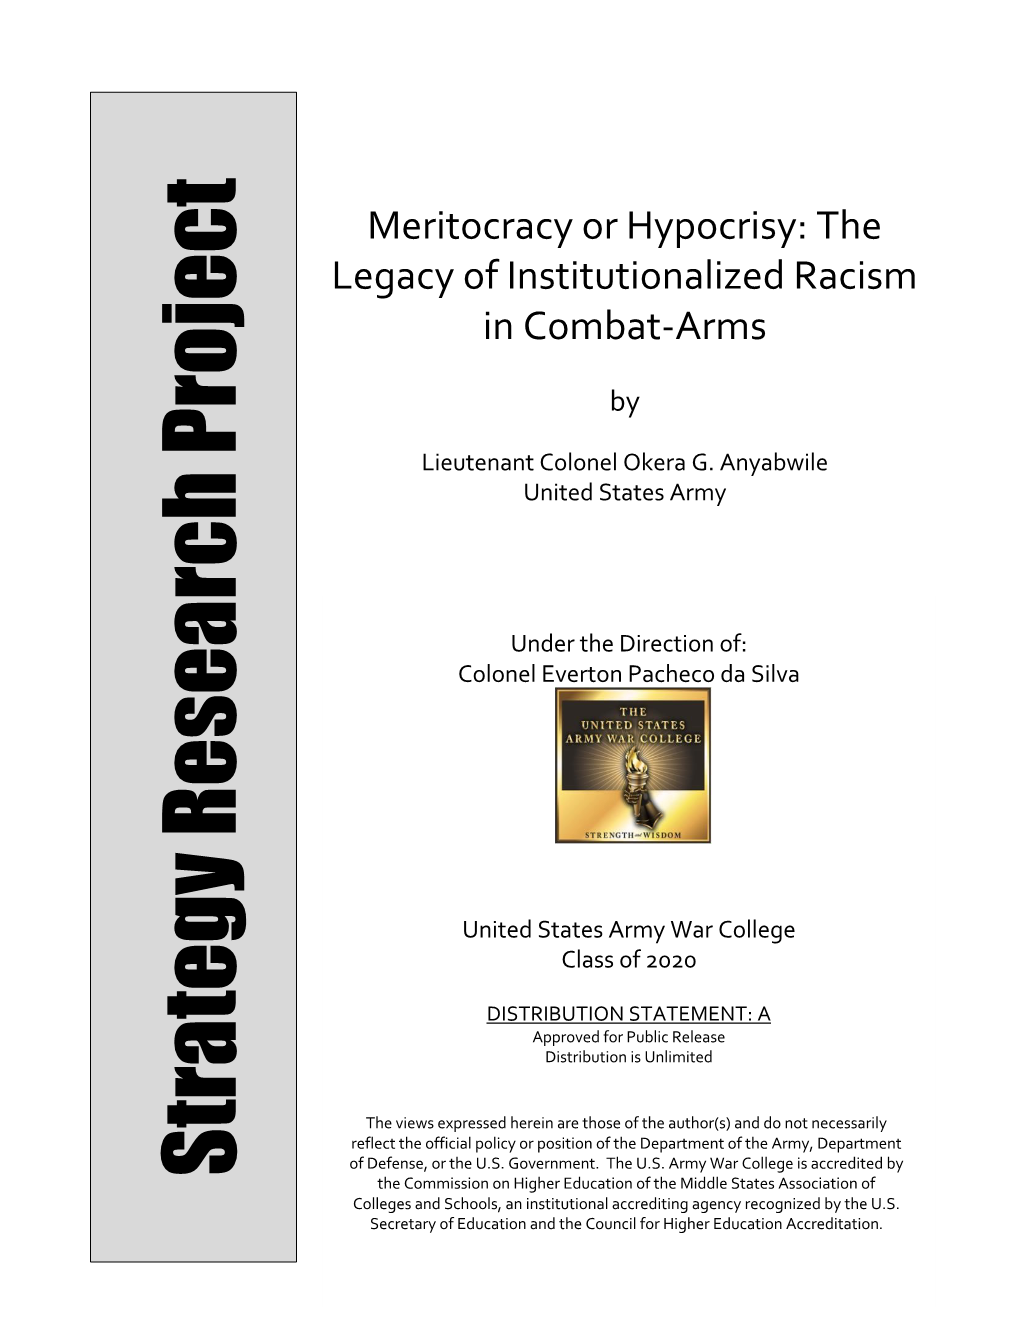 Meritocracy Or Hypocrisy: the Legacy of Institutionalized Racism in Combat-Arms